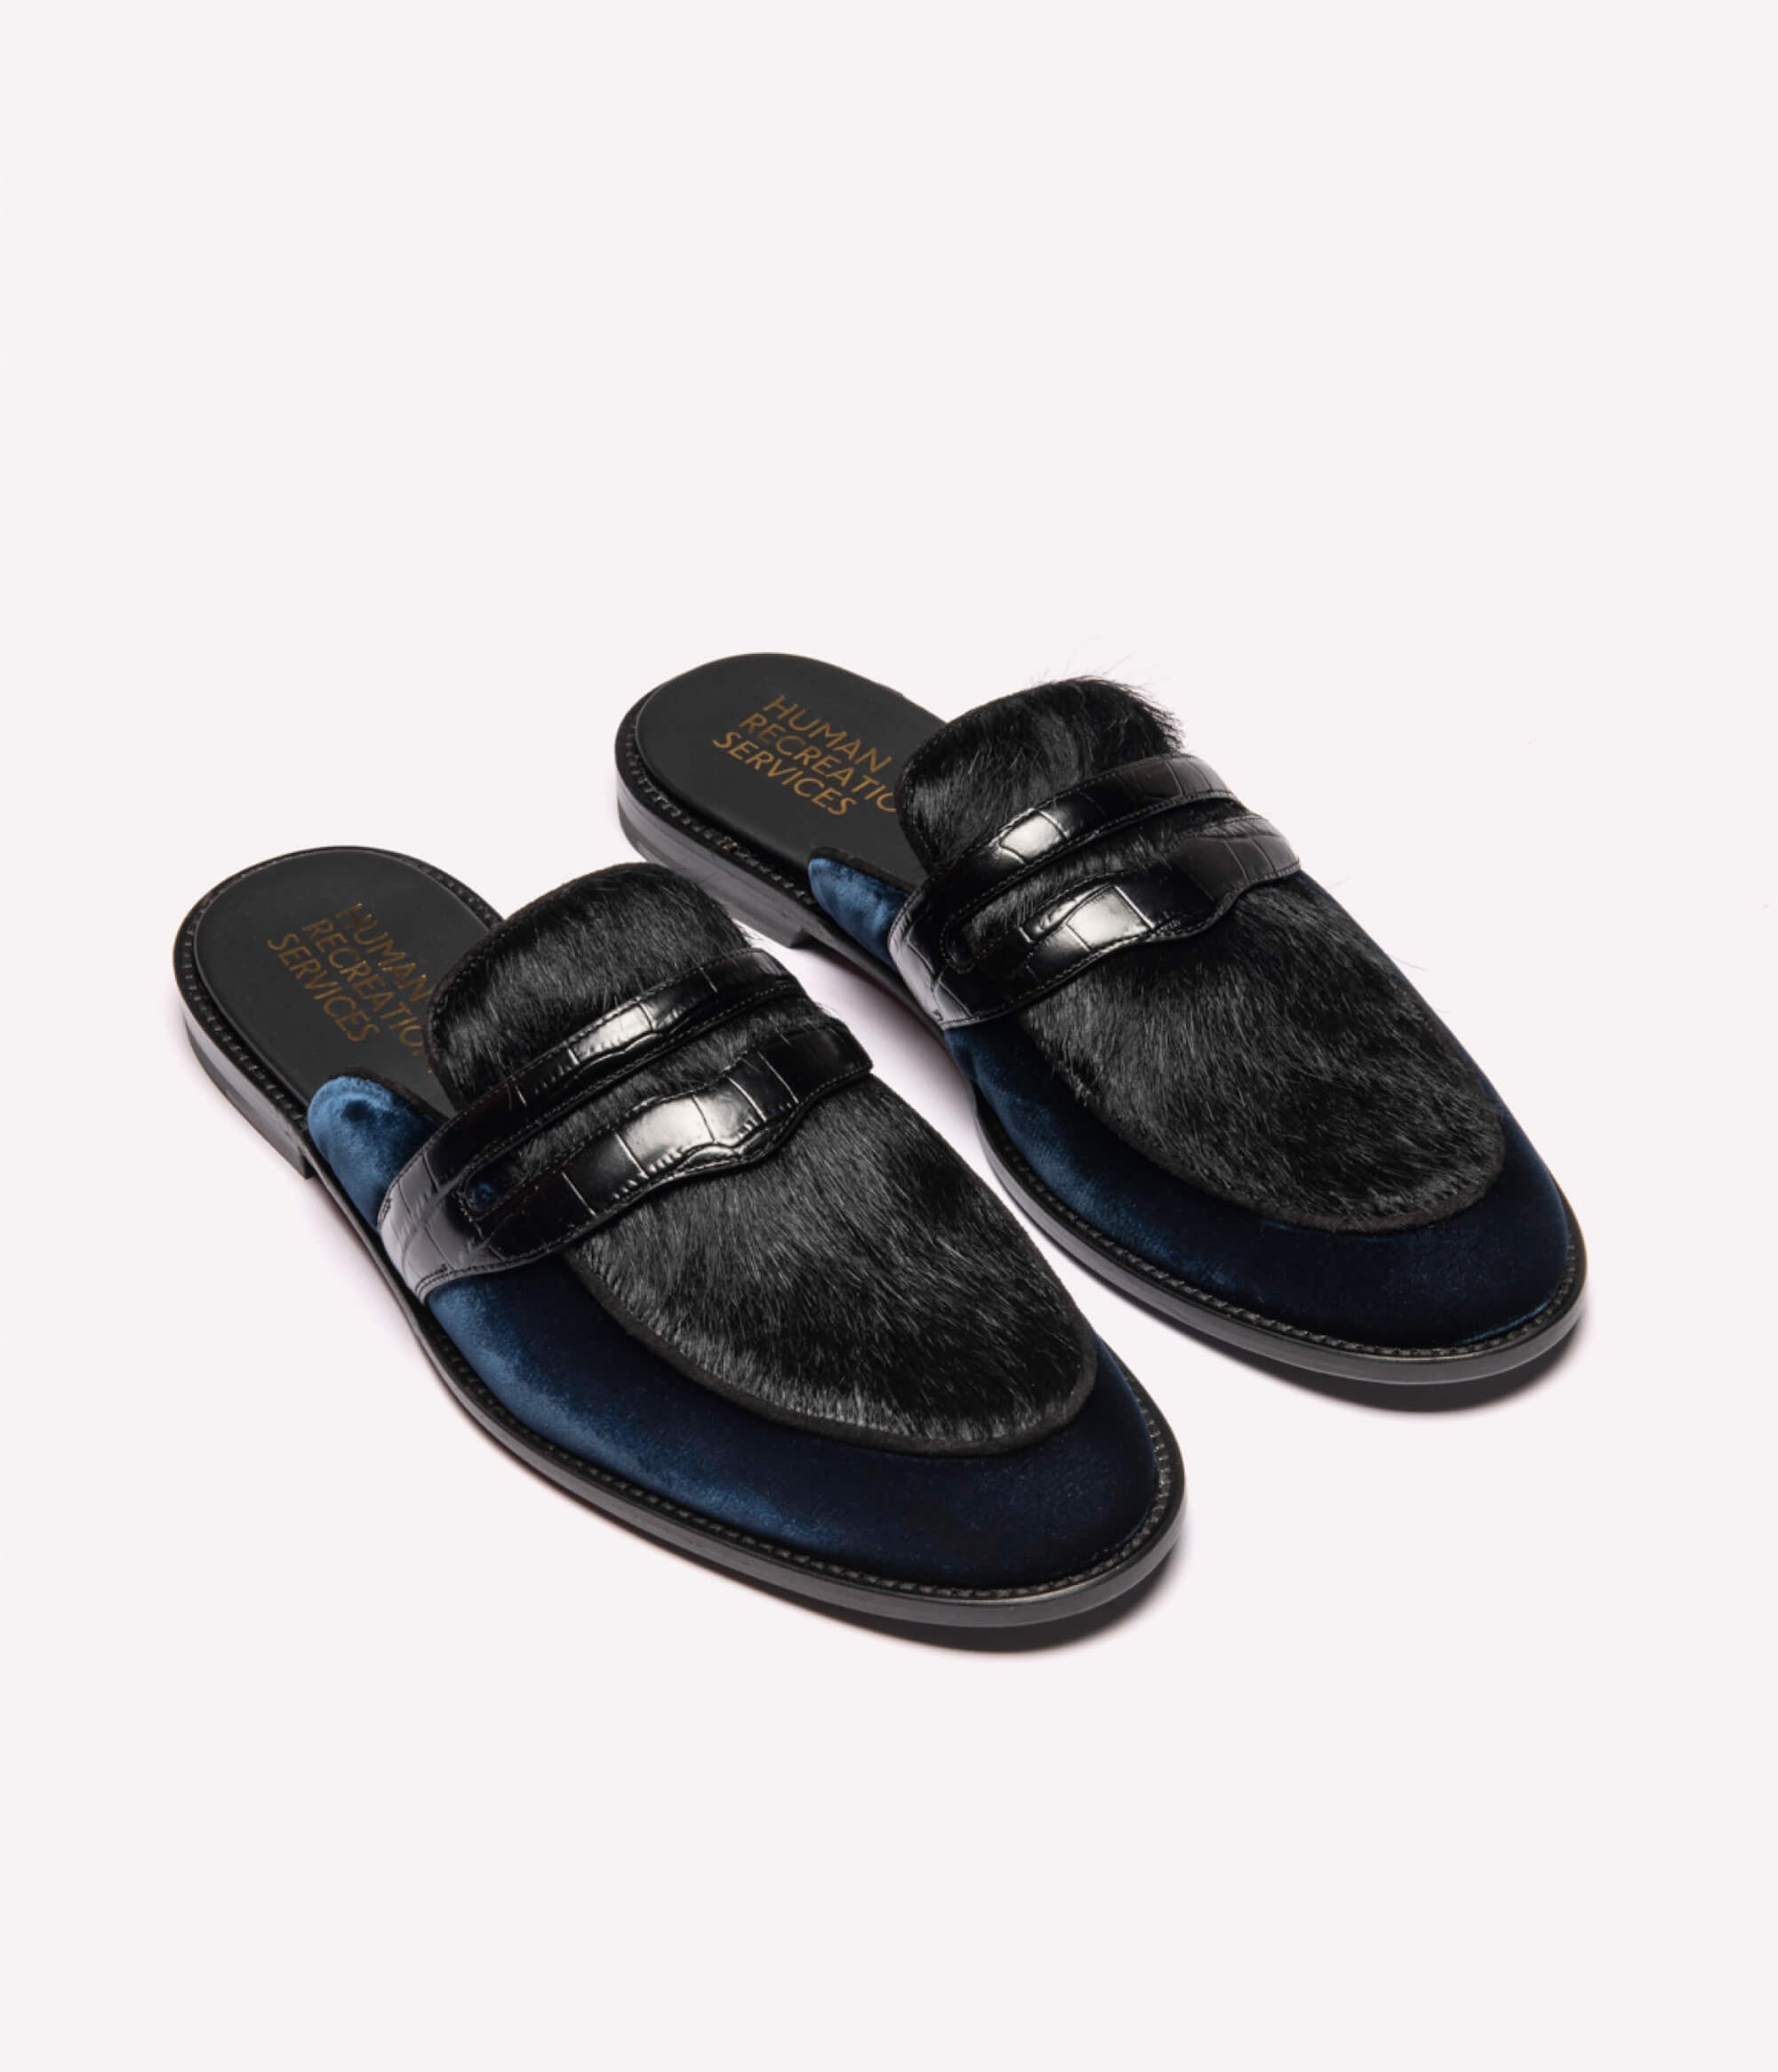 HUMAN RECREATIONAL SERVICES PALAZZO SLIPPER IN DARK BLUE AND BLACK MADE WITH ITALIAN CALF SKIN